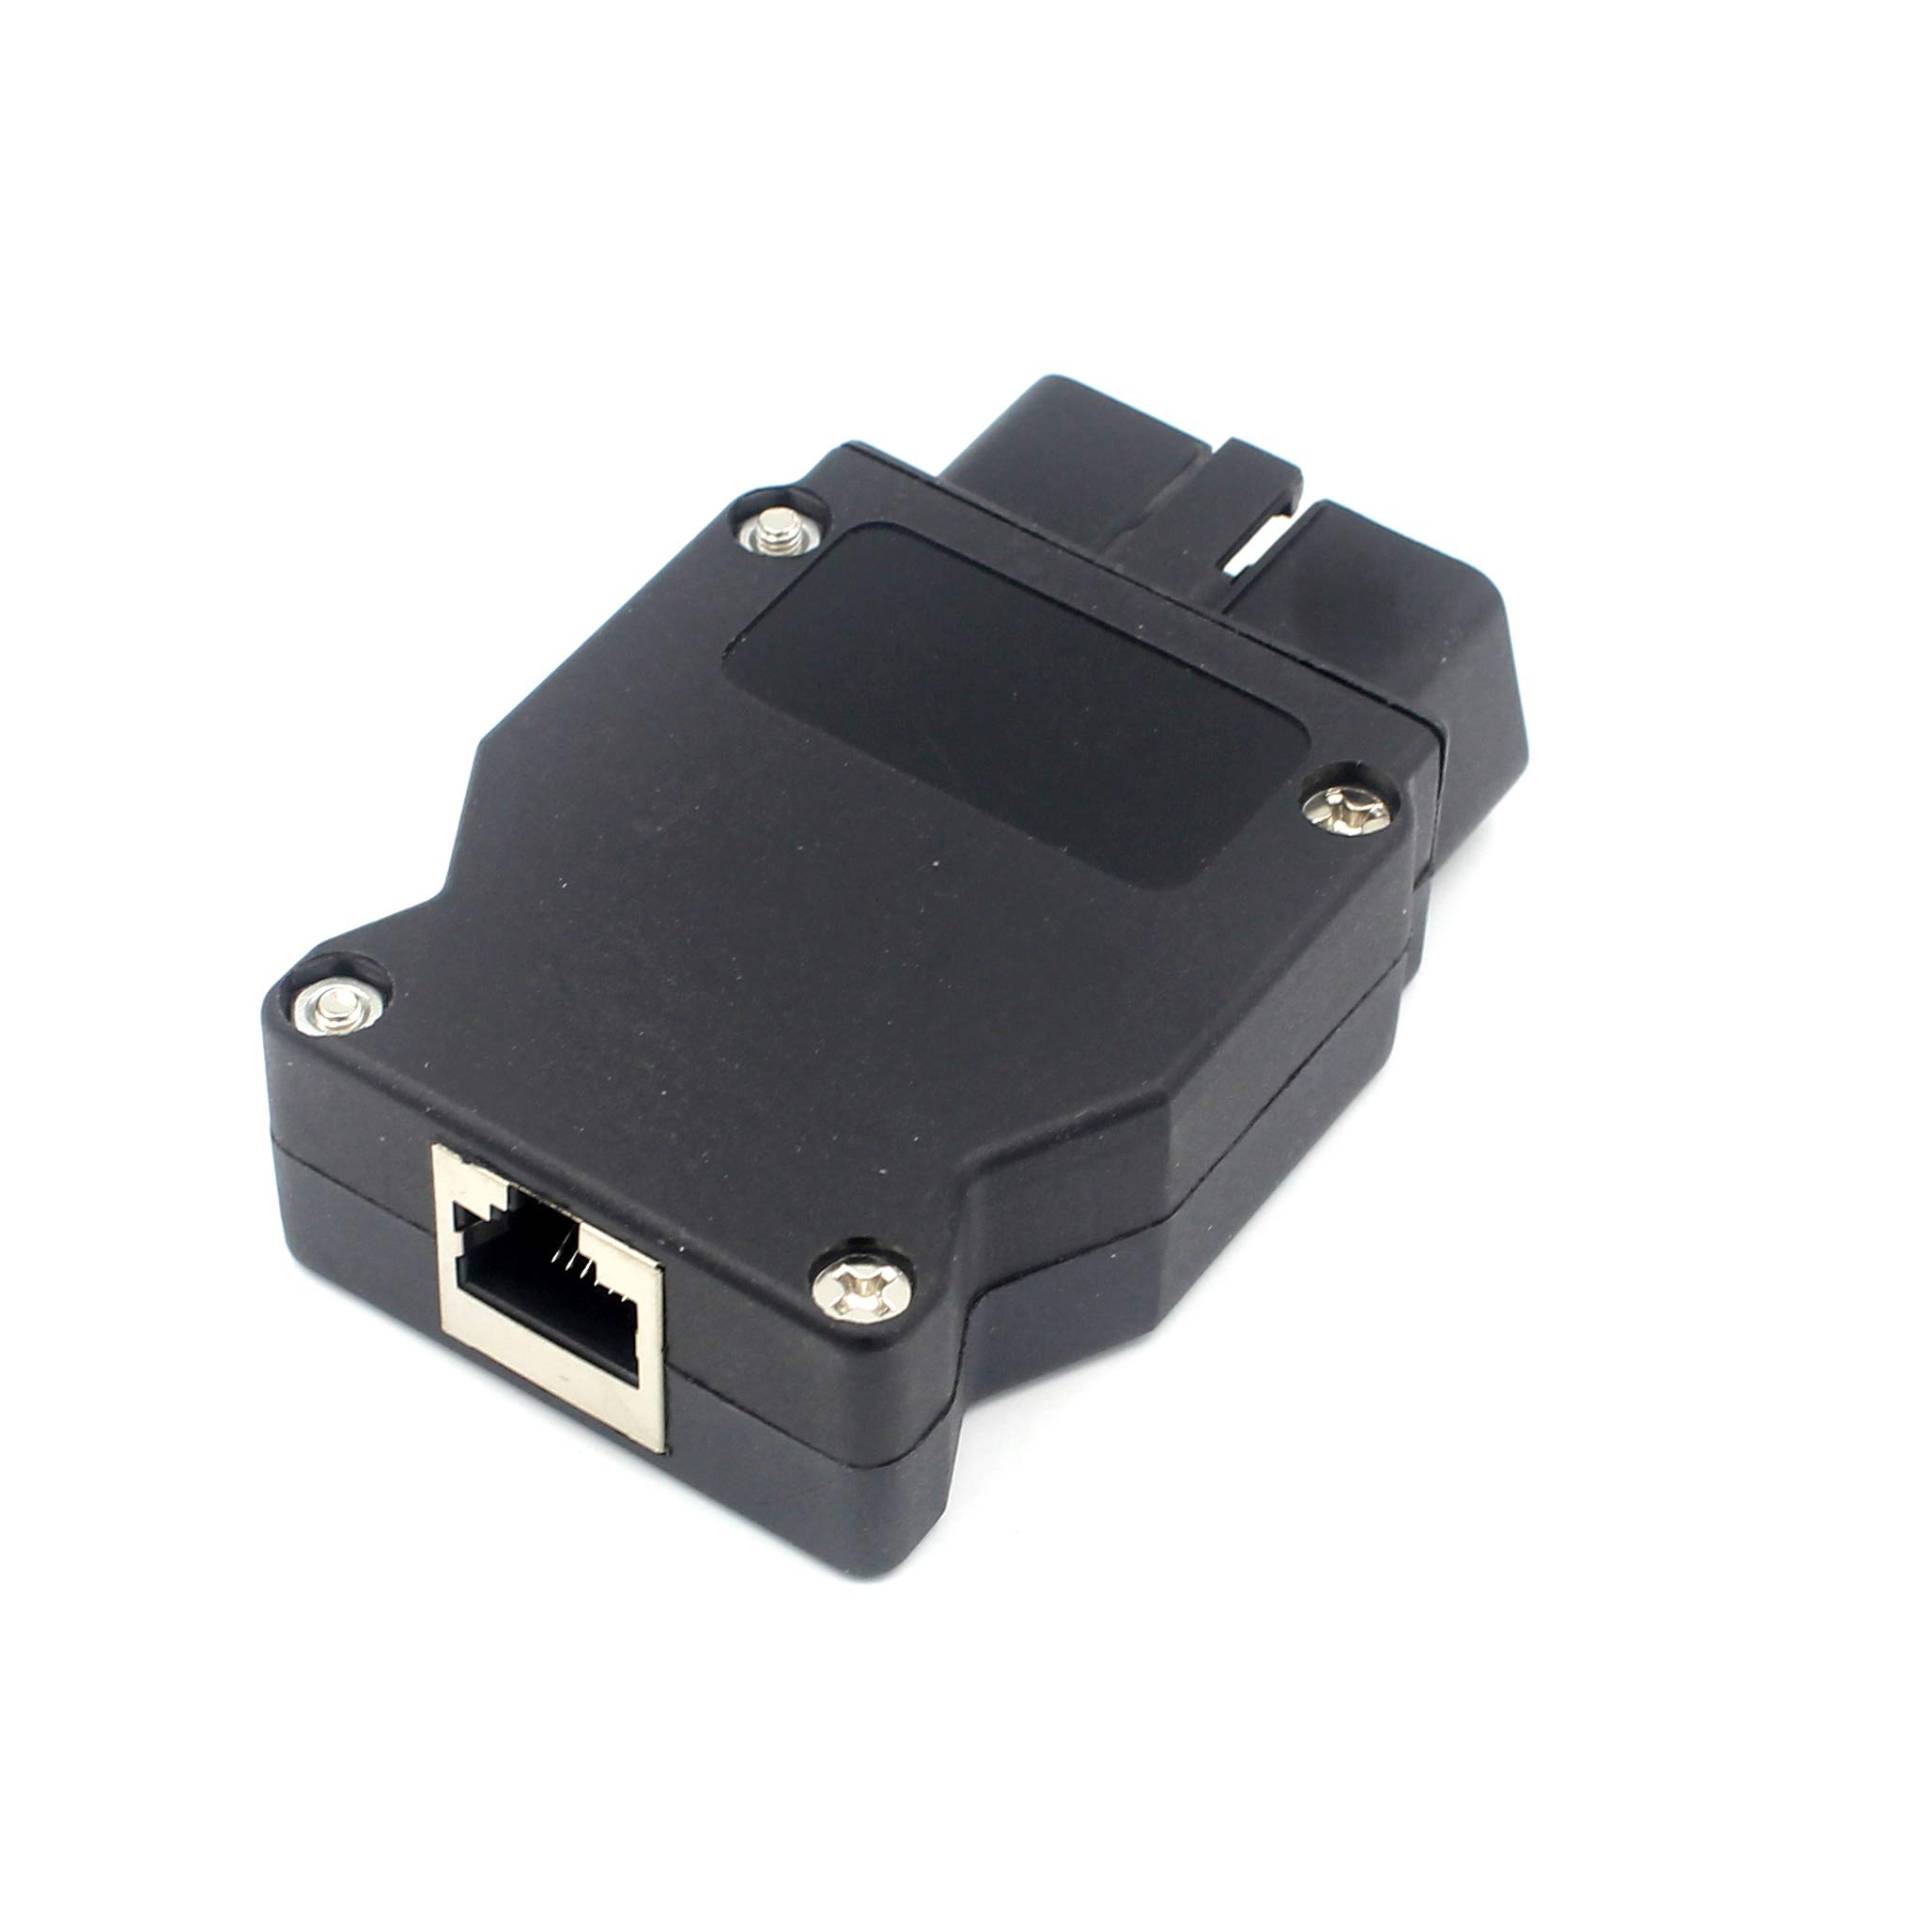 LoongGate ENET Ethernet an OBD2 16-Pin-Schnittstellenadapter für BMW E-SYS ICOM-Codierdiagnose der E-SYS-Serie der E-SYS und E-Serie der späten E-Serie von LoongGate